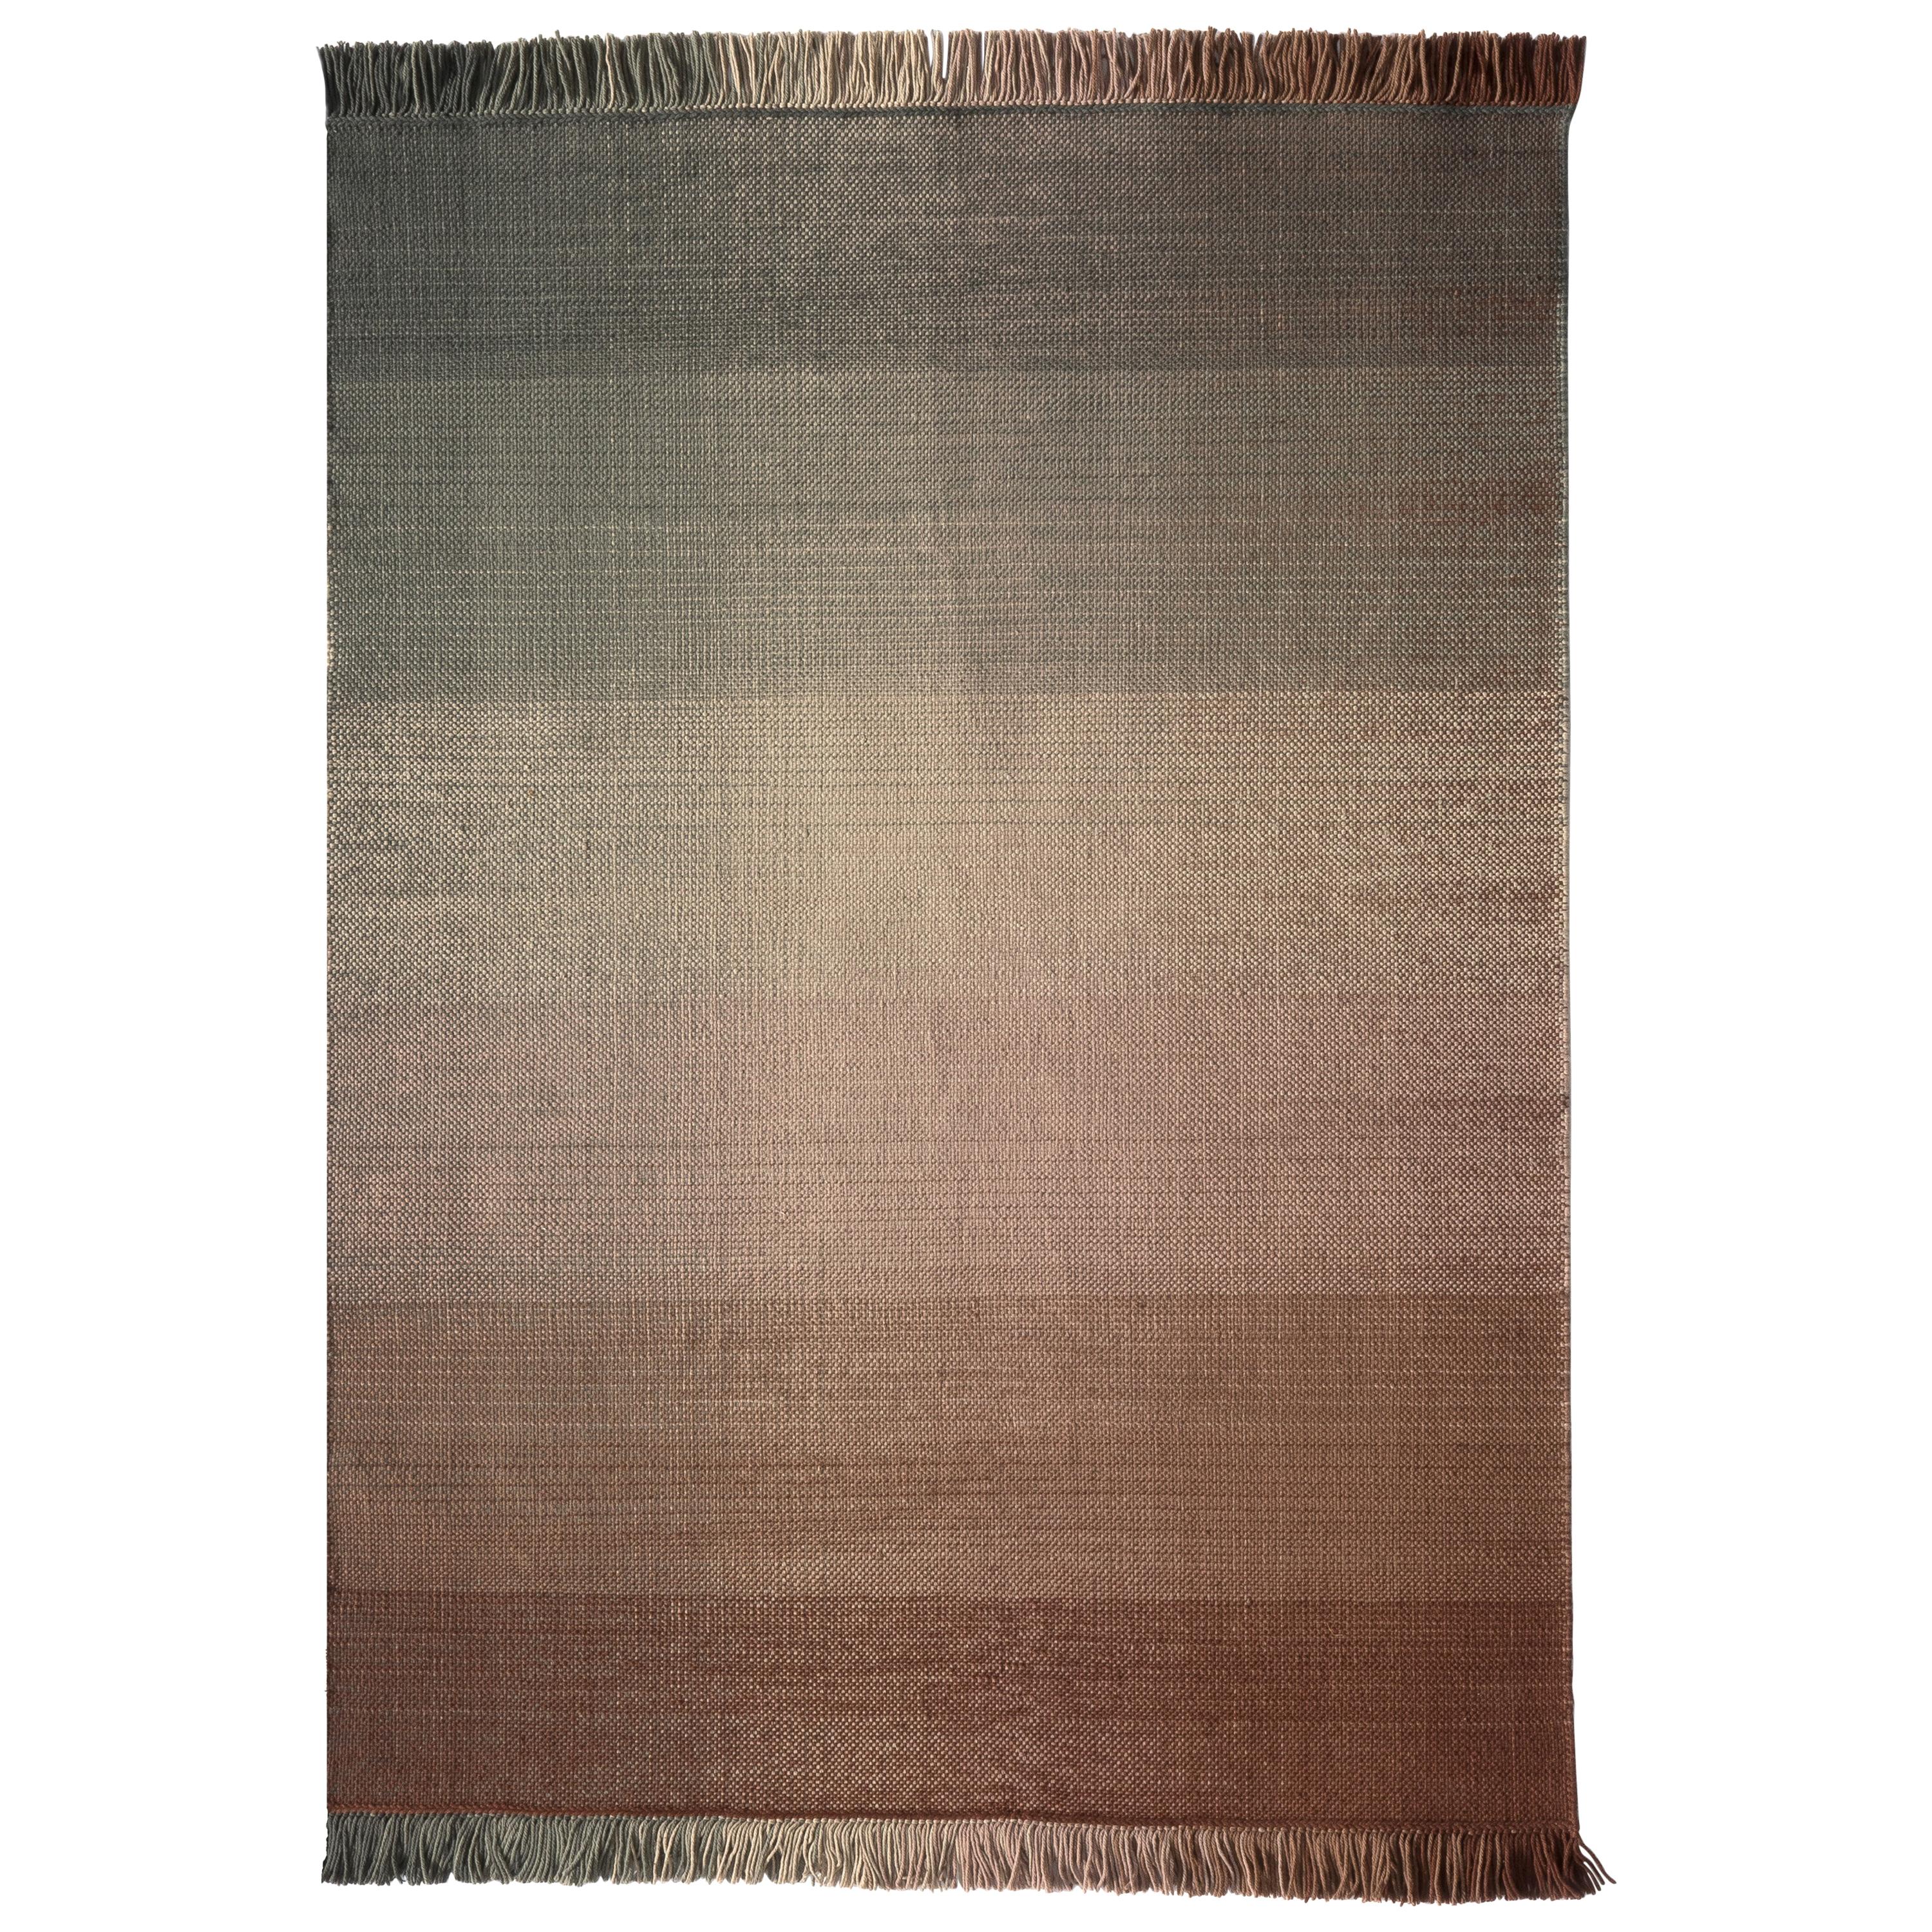 Nanimarquina Shade Outdoor Rug 4 in Brown & Blue by Begüm Cana Özgür, Small